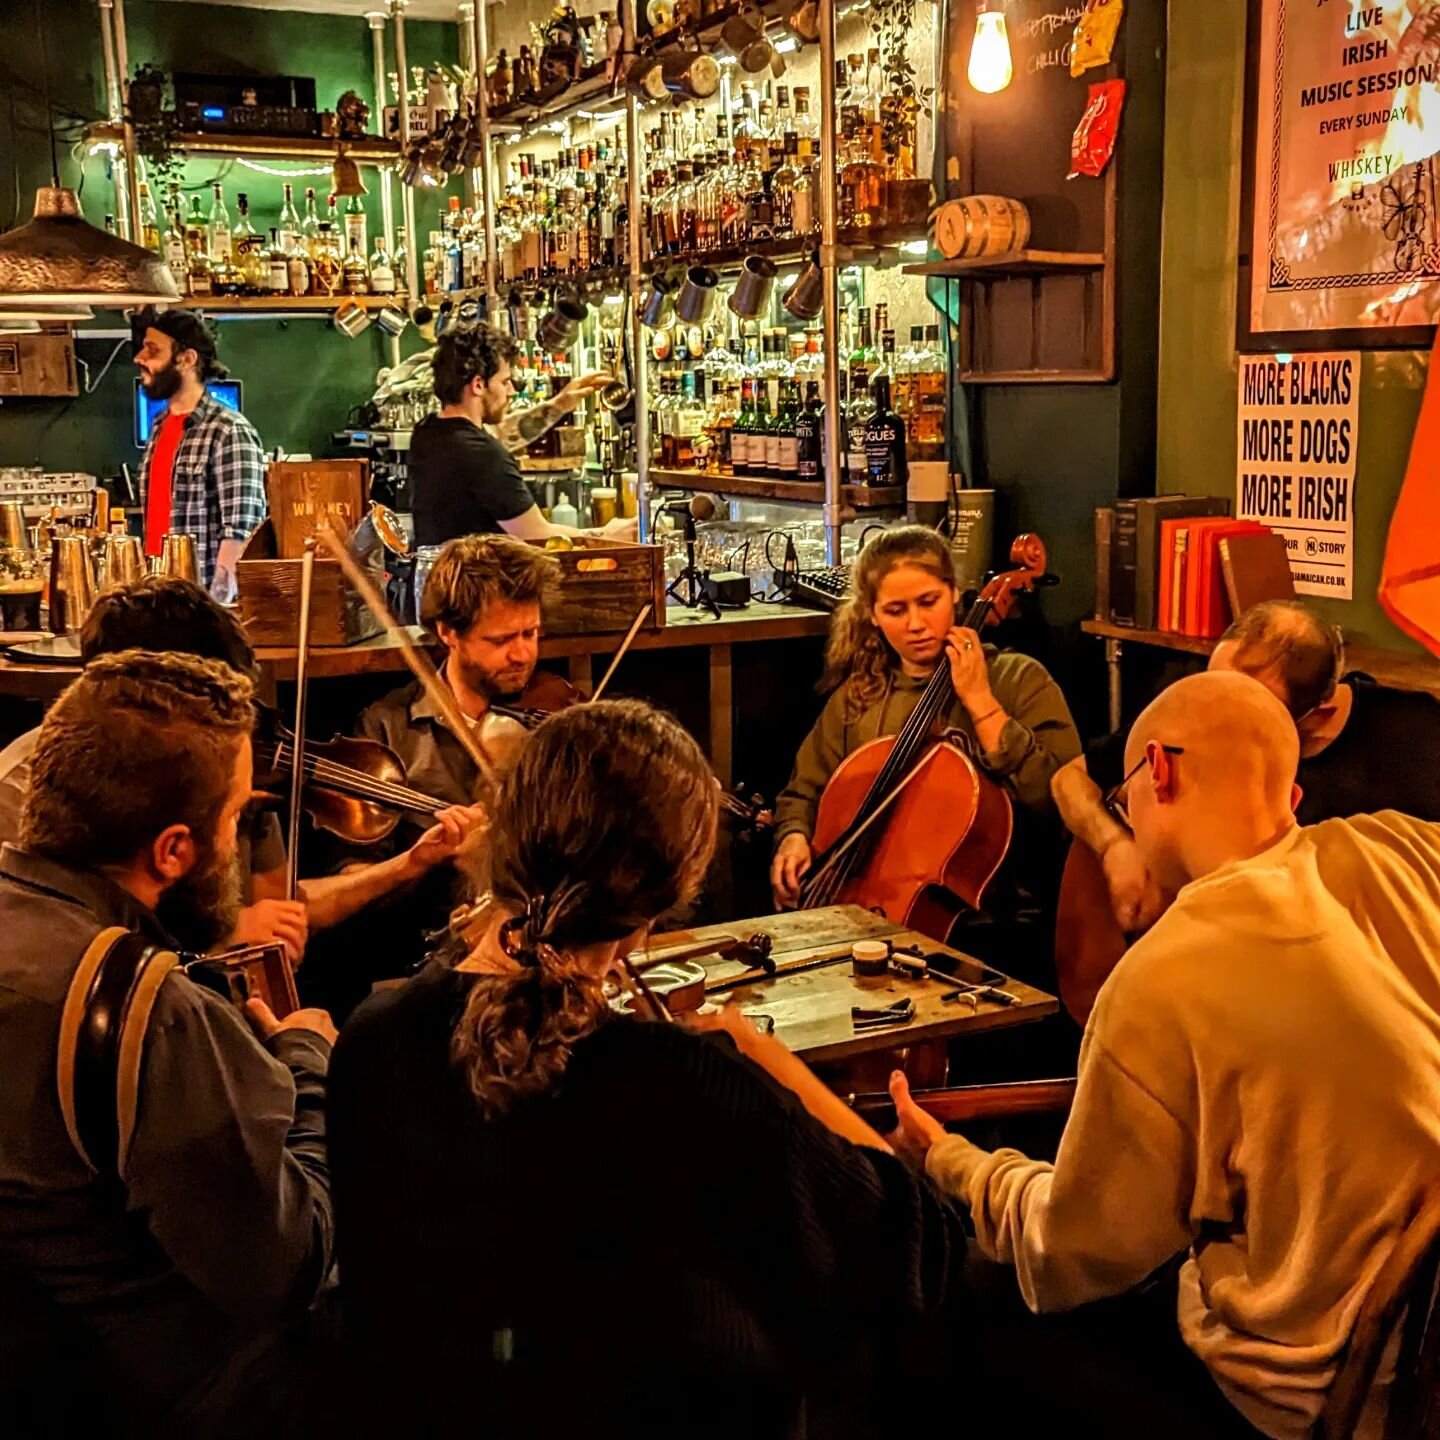 Our Sunday Traditional Seisi&uacute;n fills the room with great music, the sound of laughter and story telling whilst people tap away to the jigs and reels, all while drinks are being poured and the team swerve in and out to serve them. That's the be